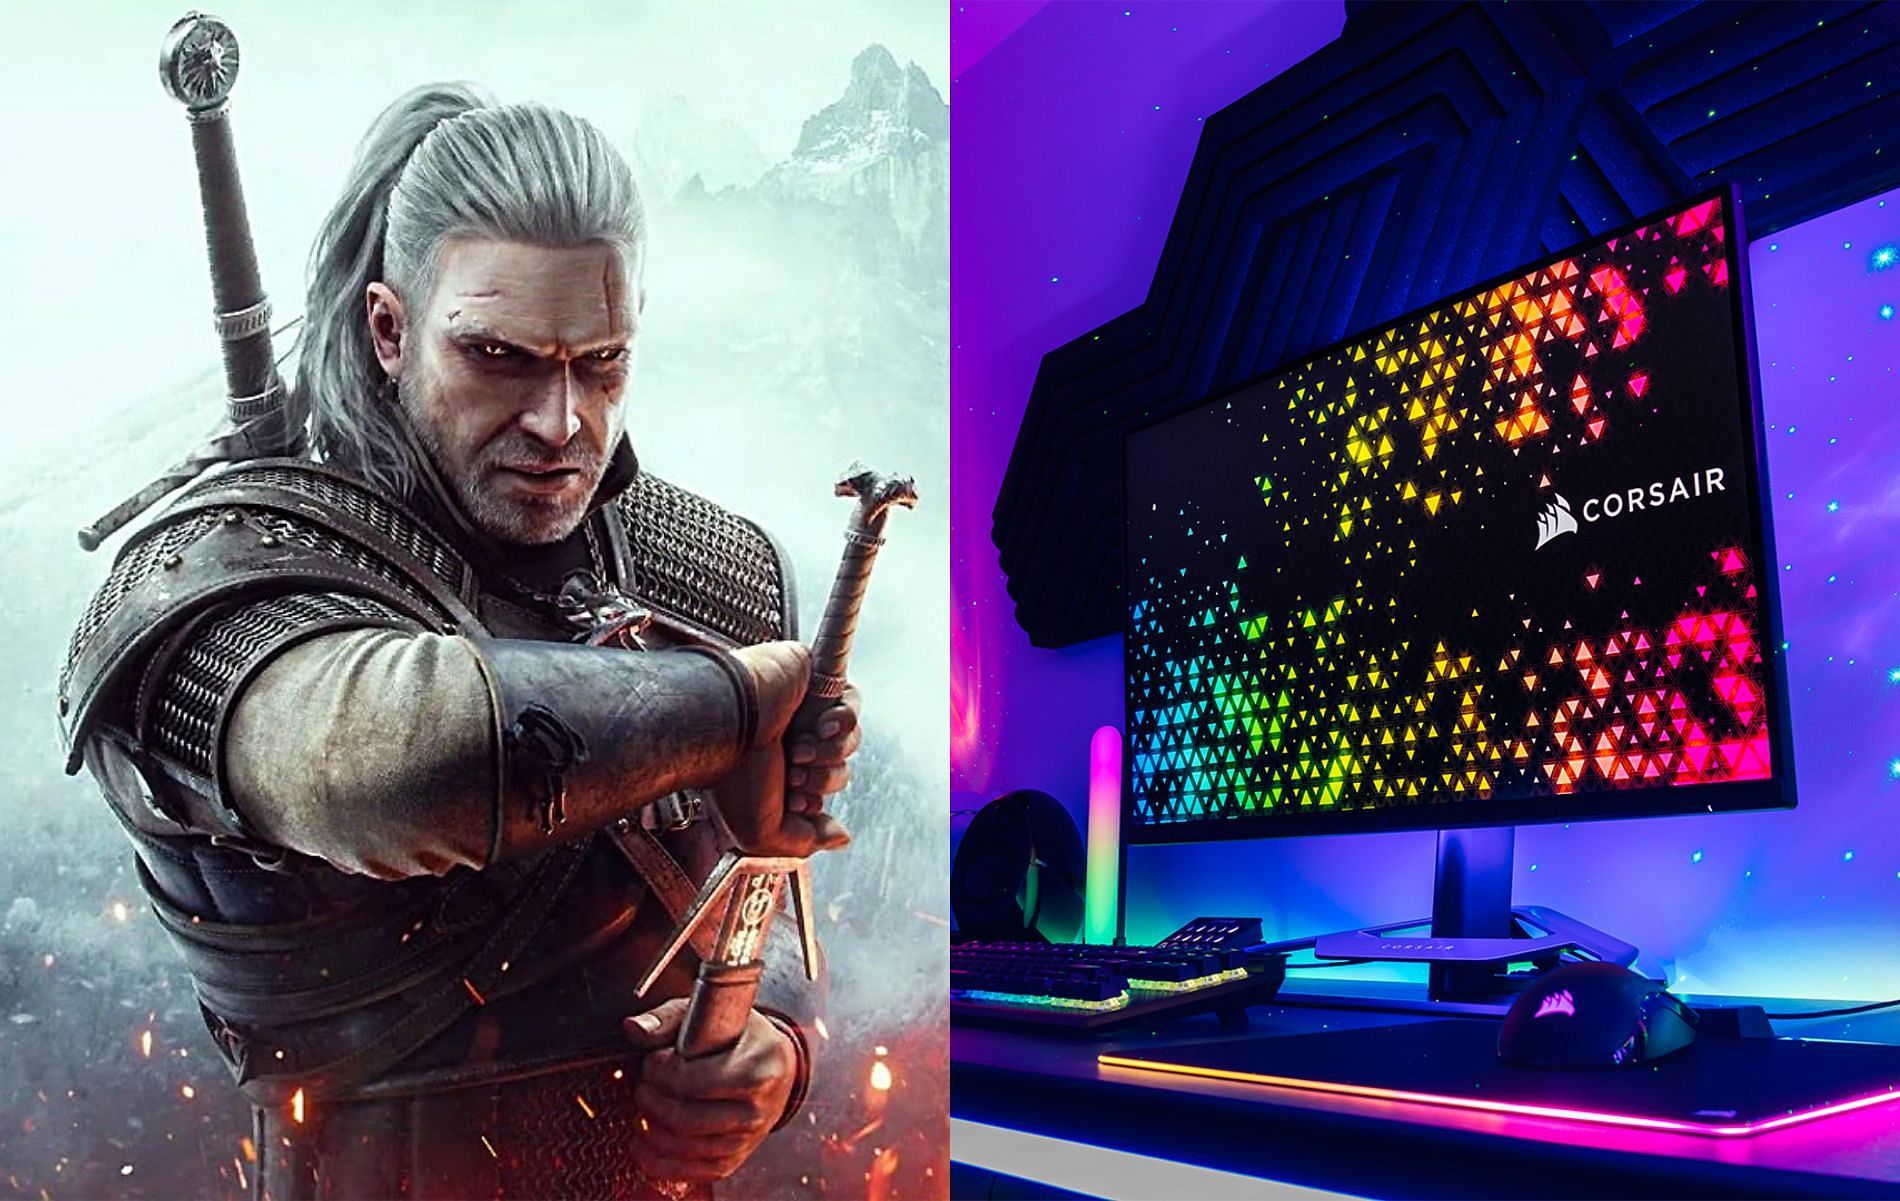 These 1440p displays will help make the most of the new visual upgrades to the acclaimed 2015 RPG (Images via CD Projekt RED/Corsair)